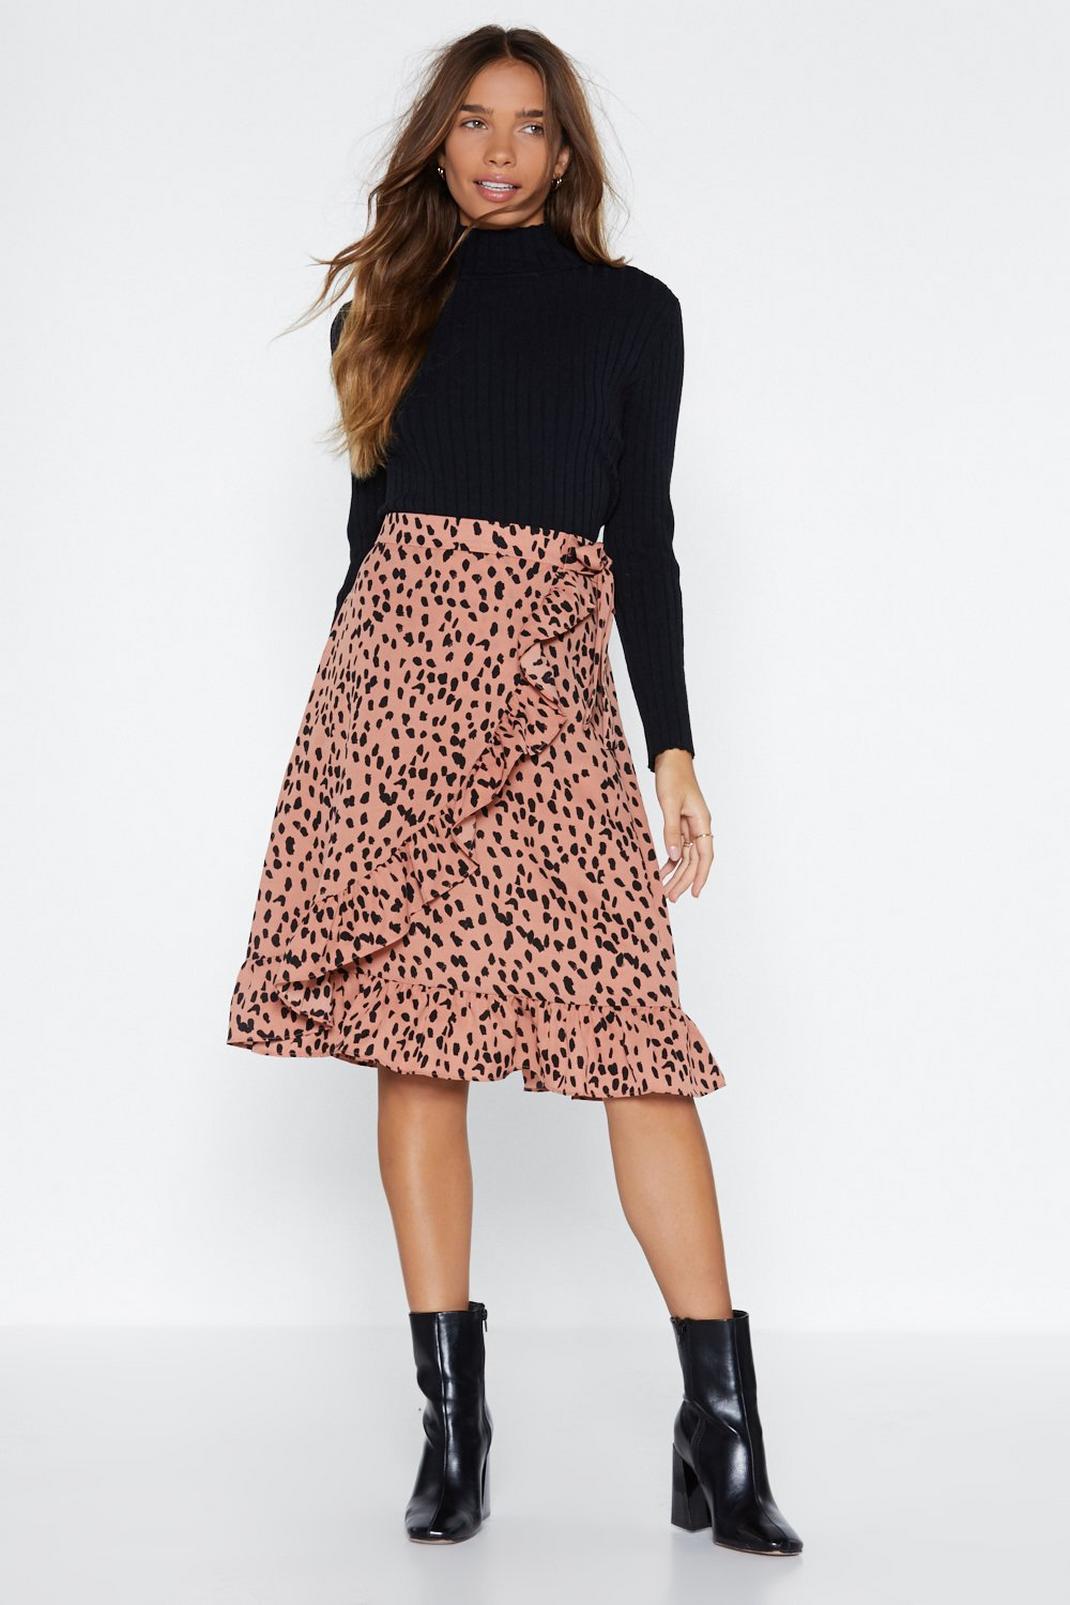 Meow-ment of Truth Cheetah Skirt image number 1